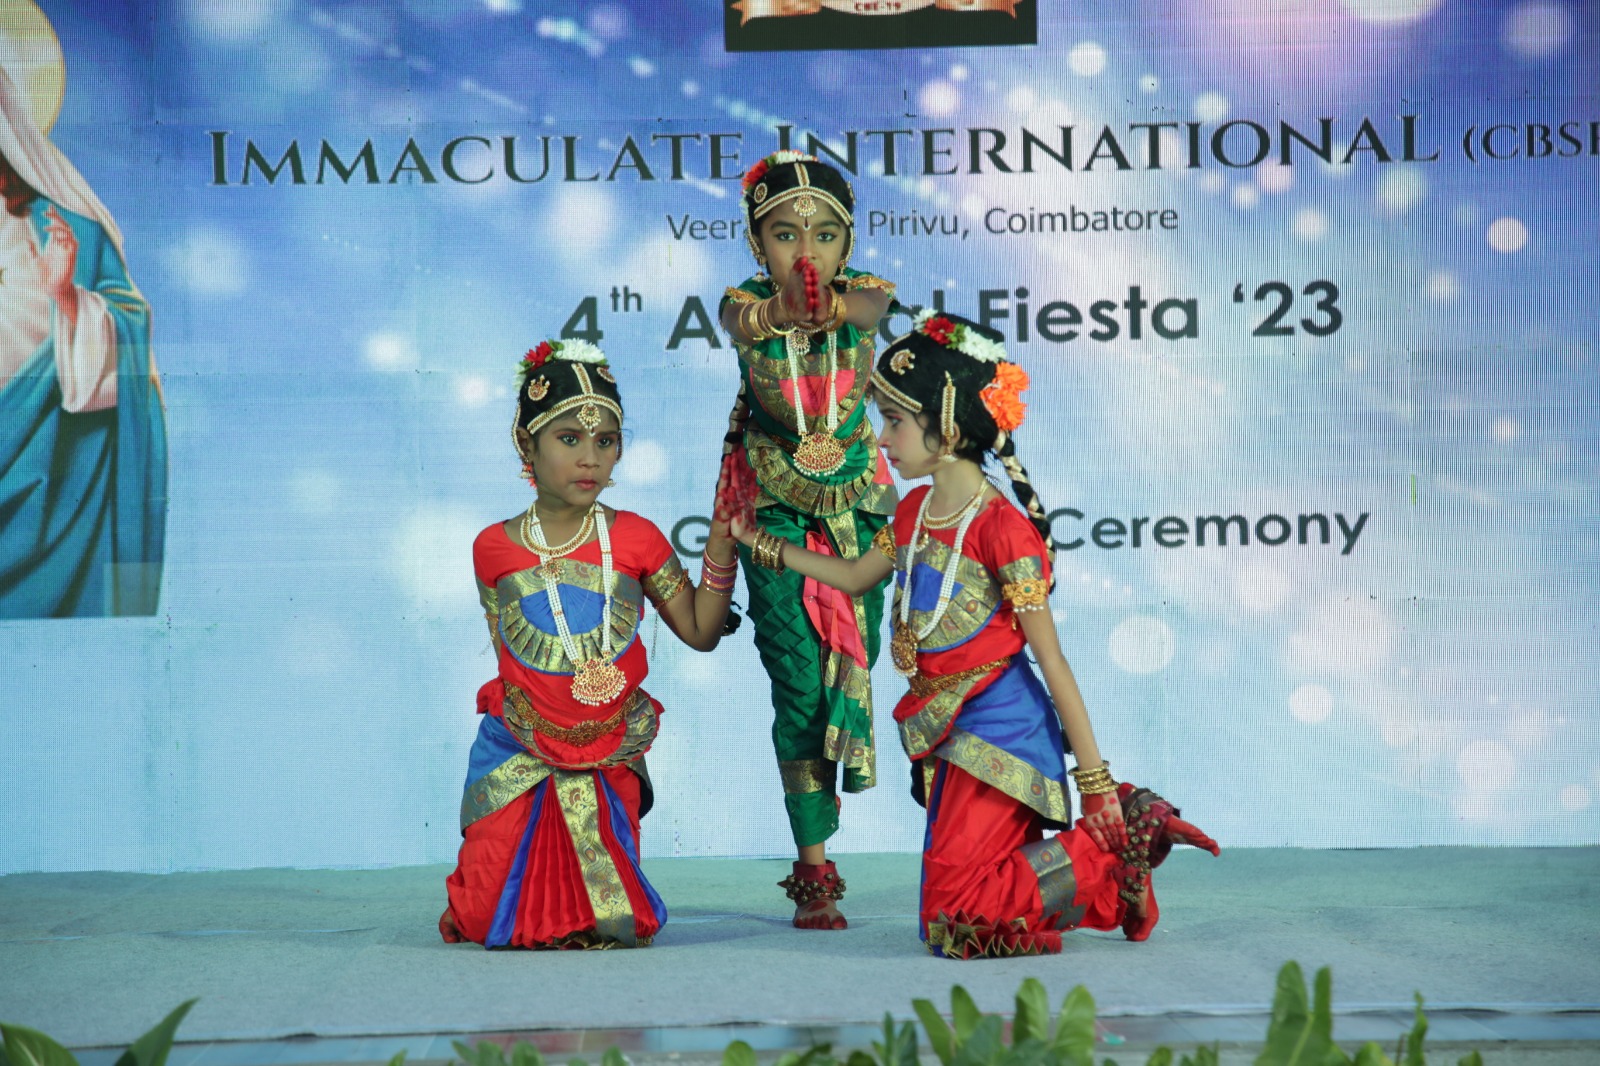 Annual day